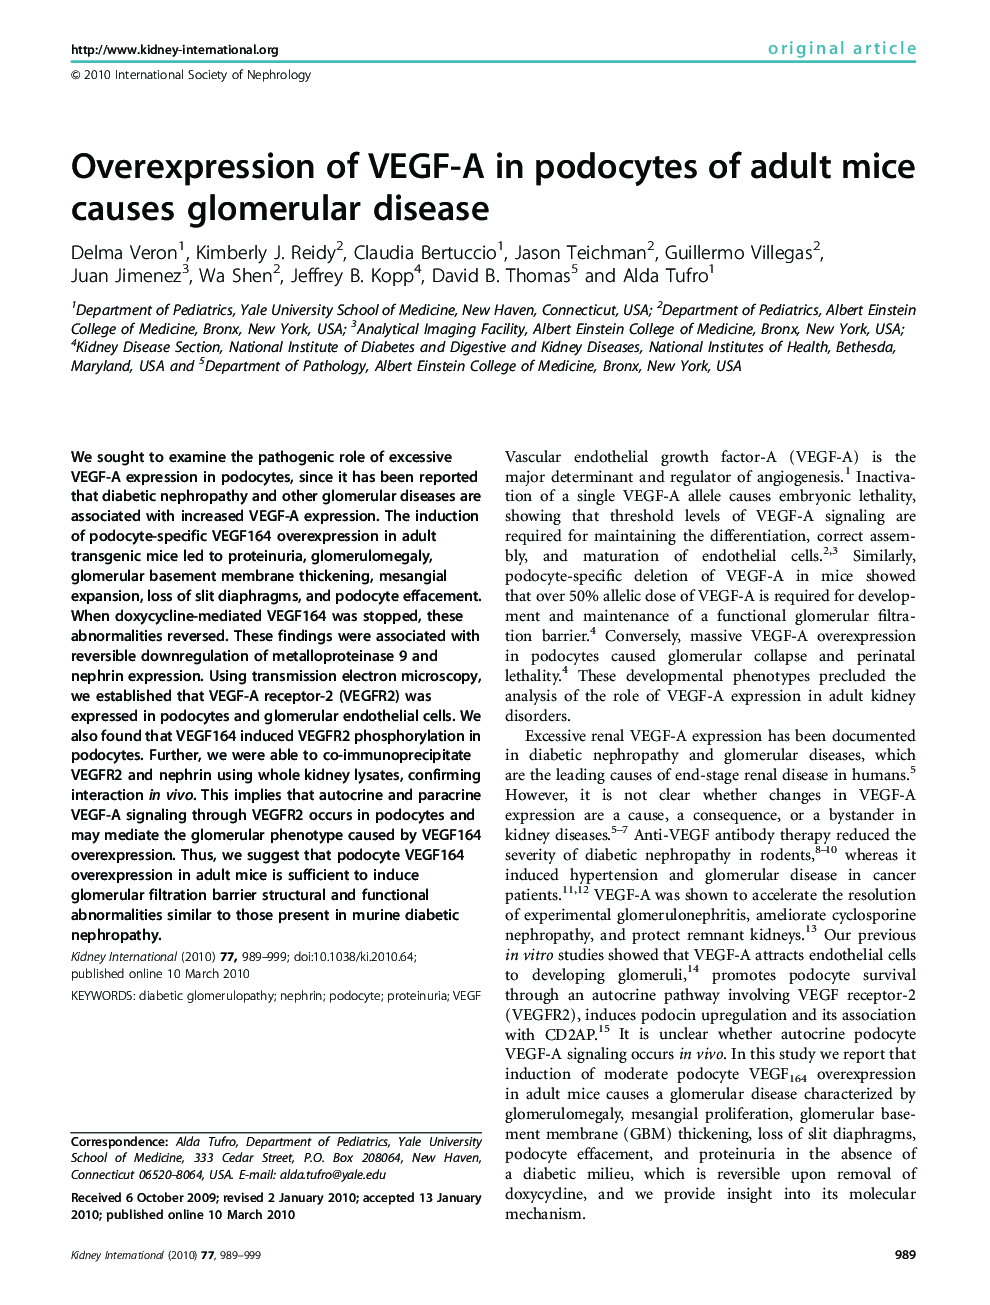 Overexpression of VEGF-A in podocytes of adult mice causes glomerular disease 